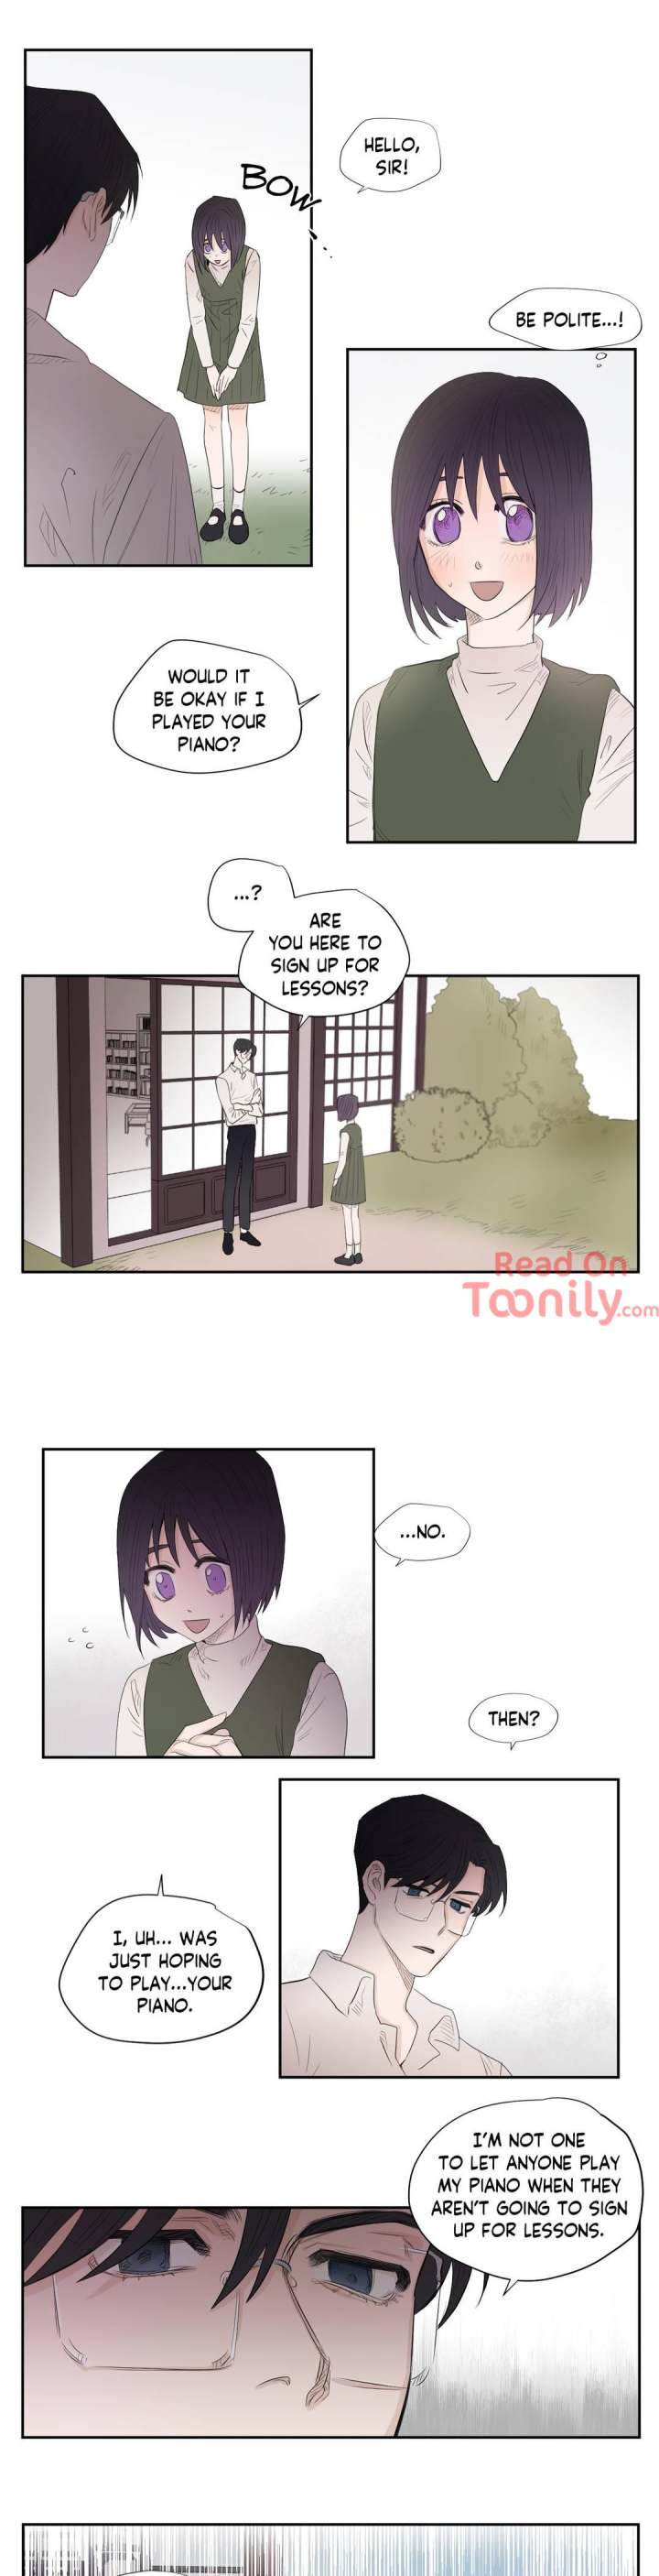 Broken Melody - Chapter 4 Page 1